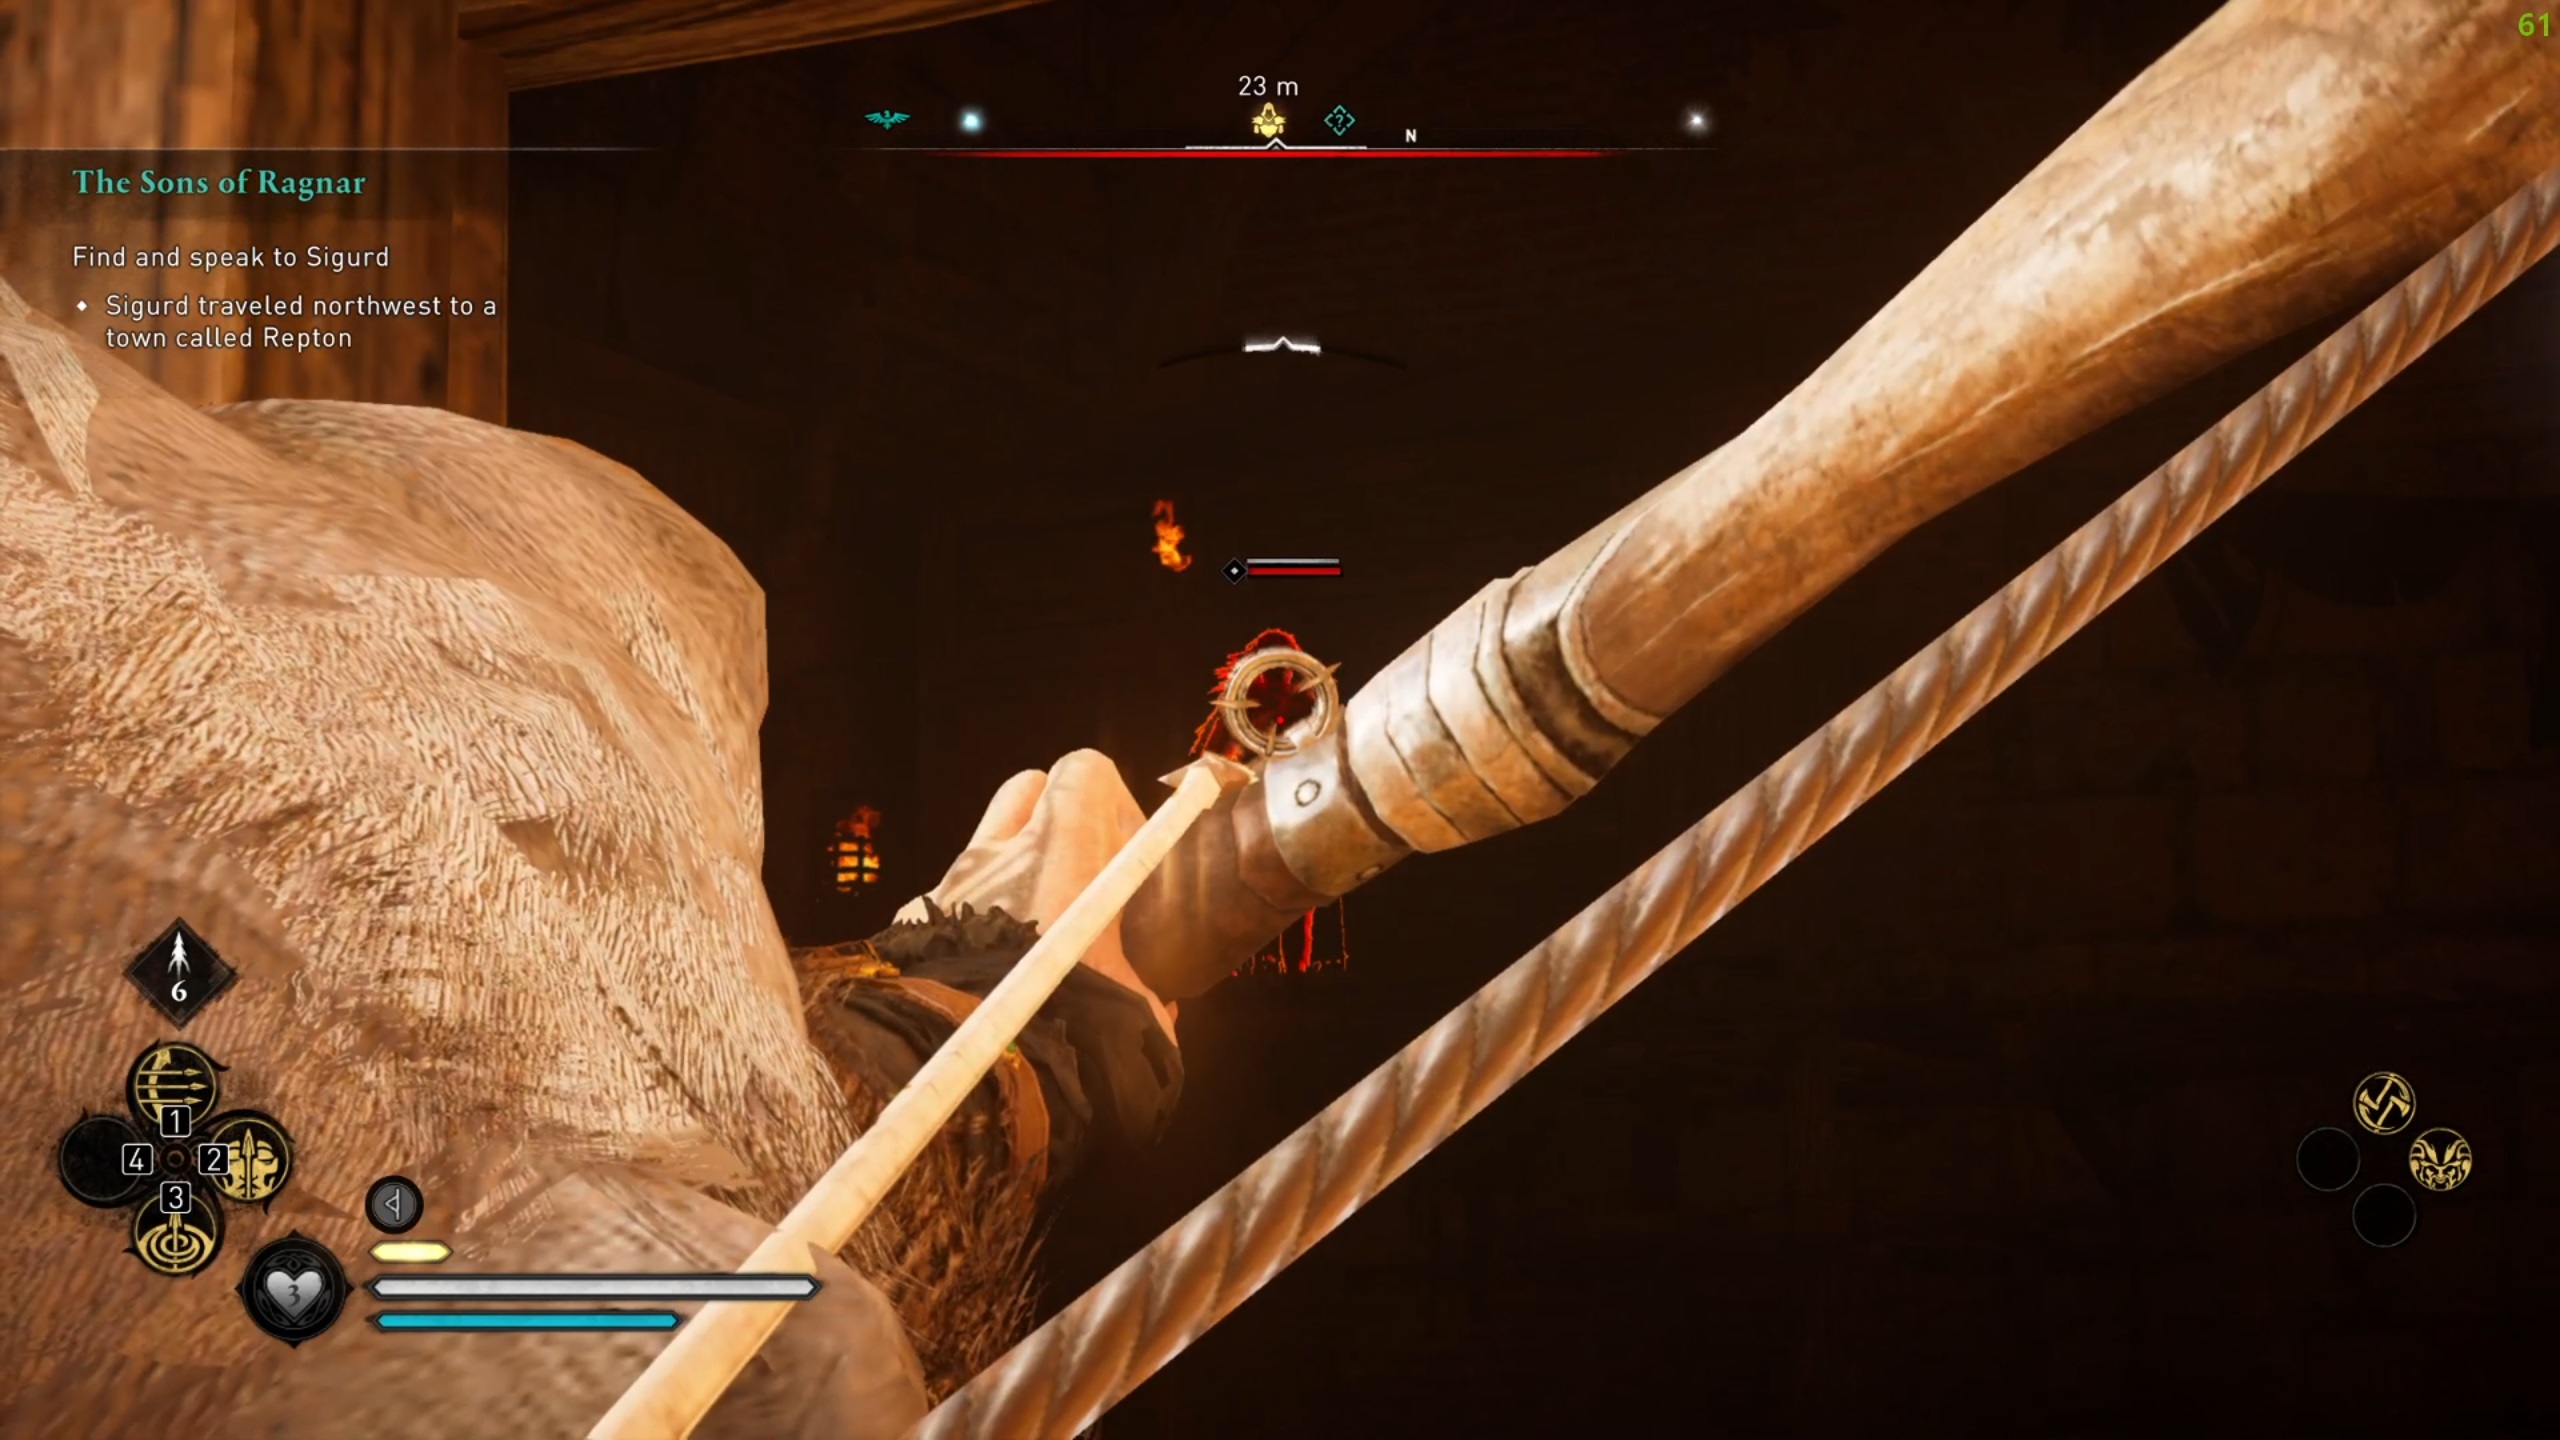 where to buy arrows in assassin's creed odyssey